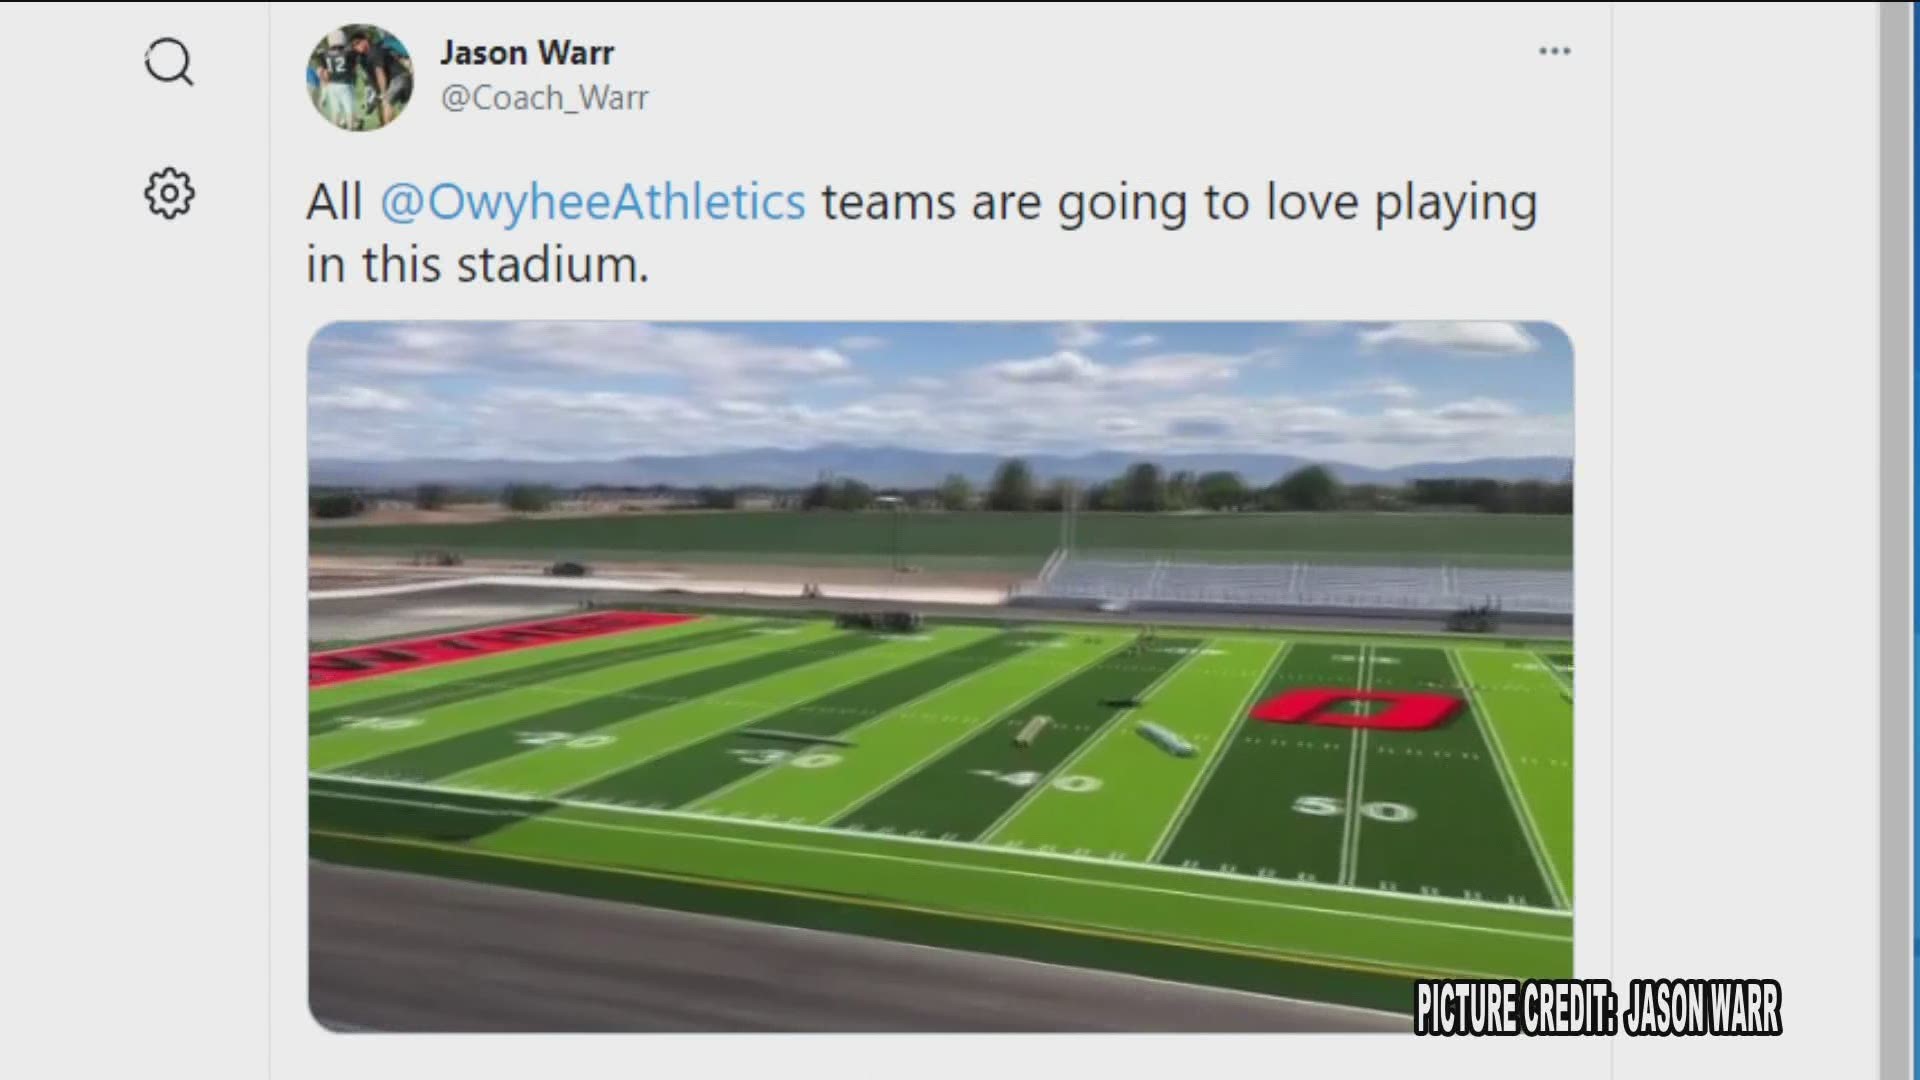 The school's activities director tweeted a video showing the Storm's new football field.